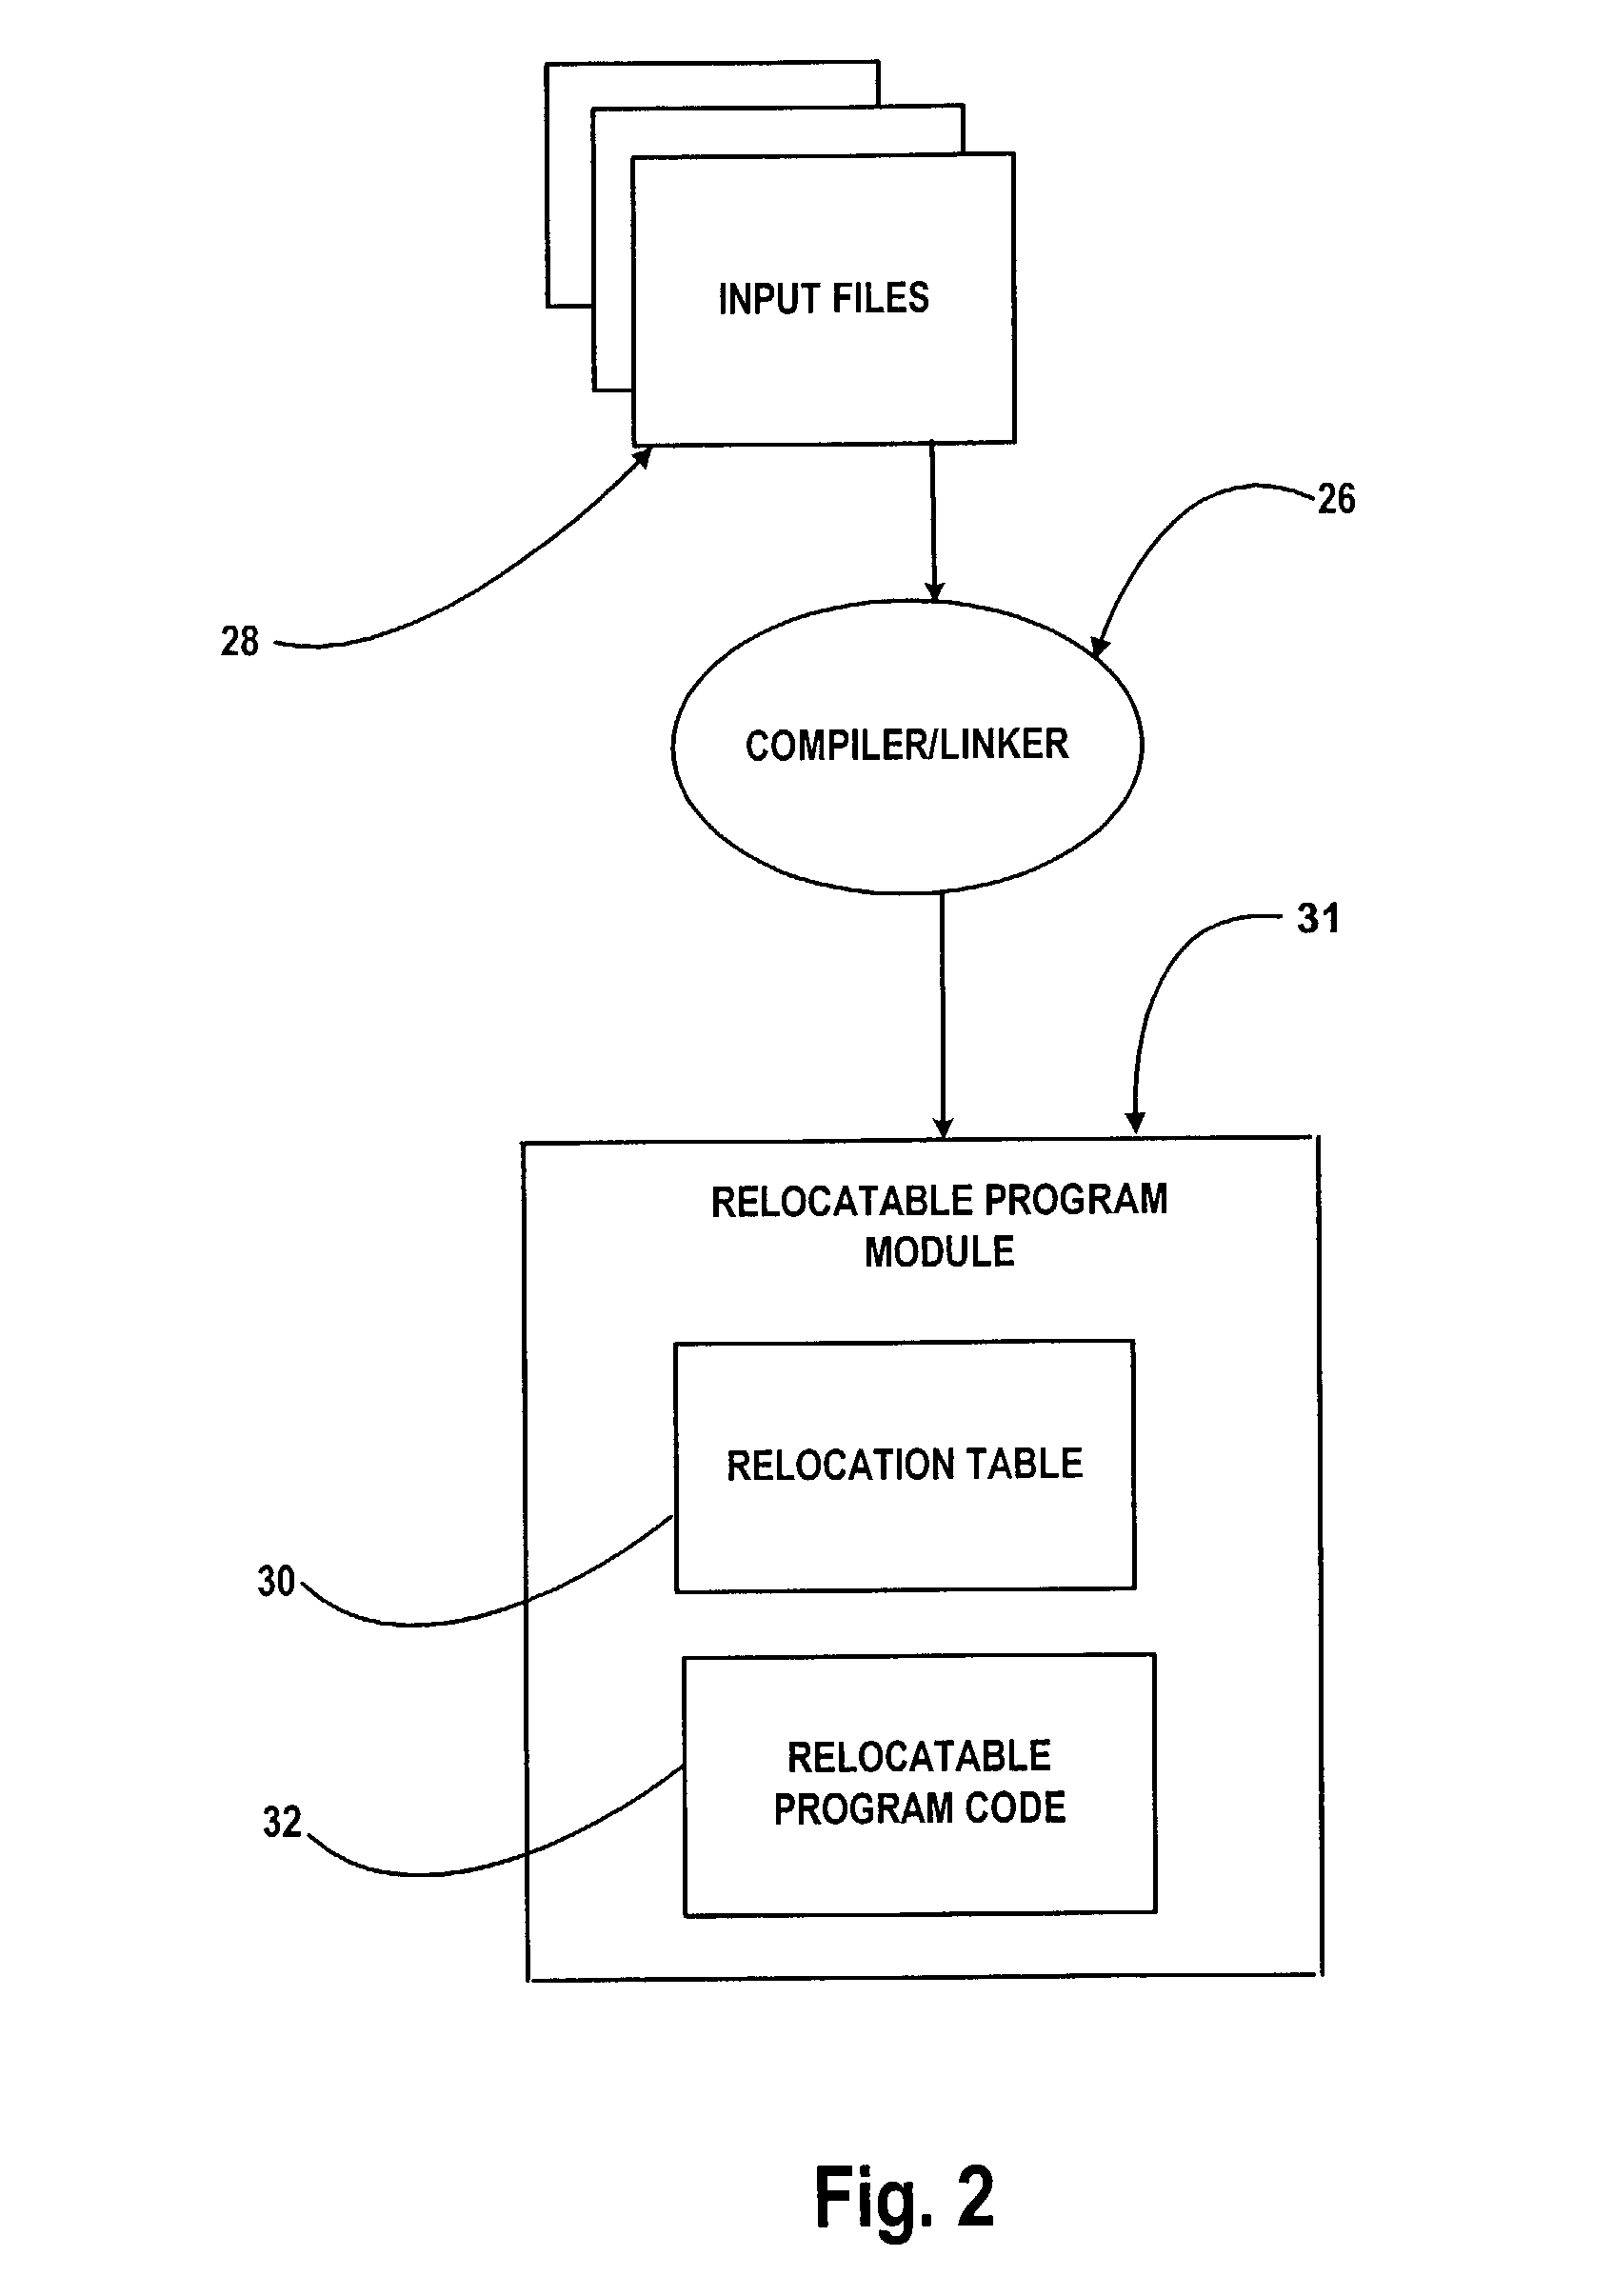 Distributed program relocation for a computer system